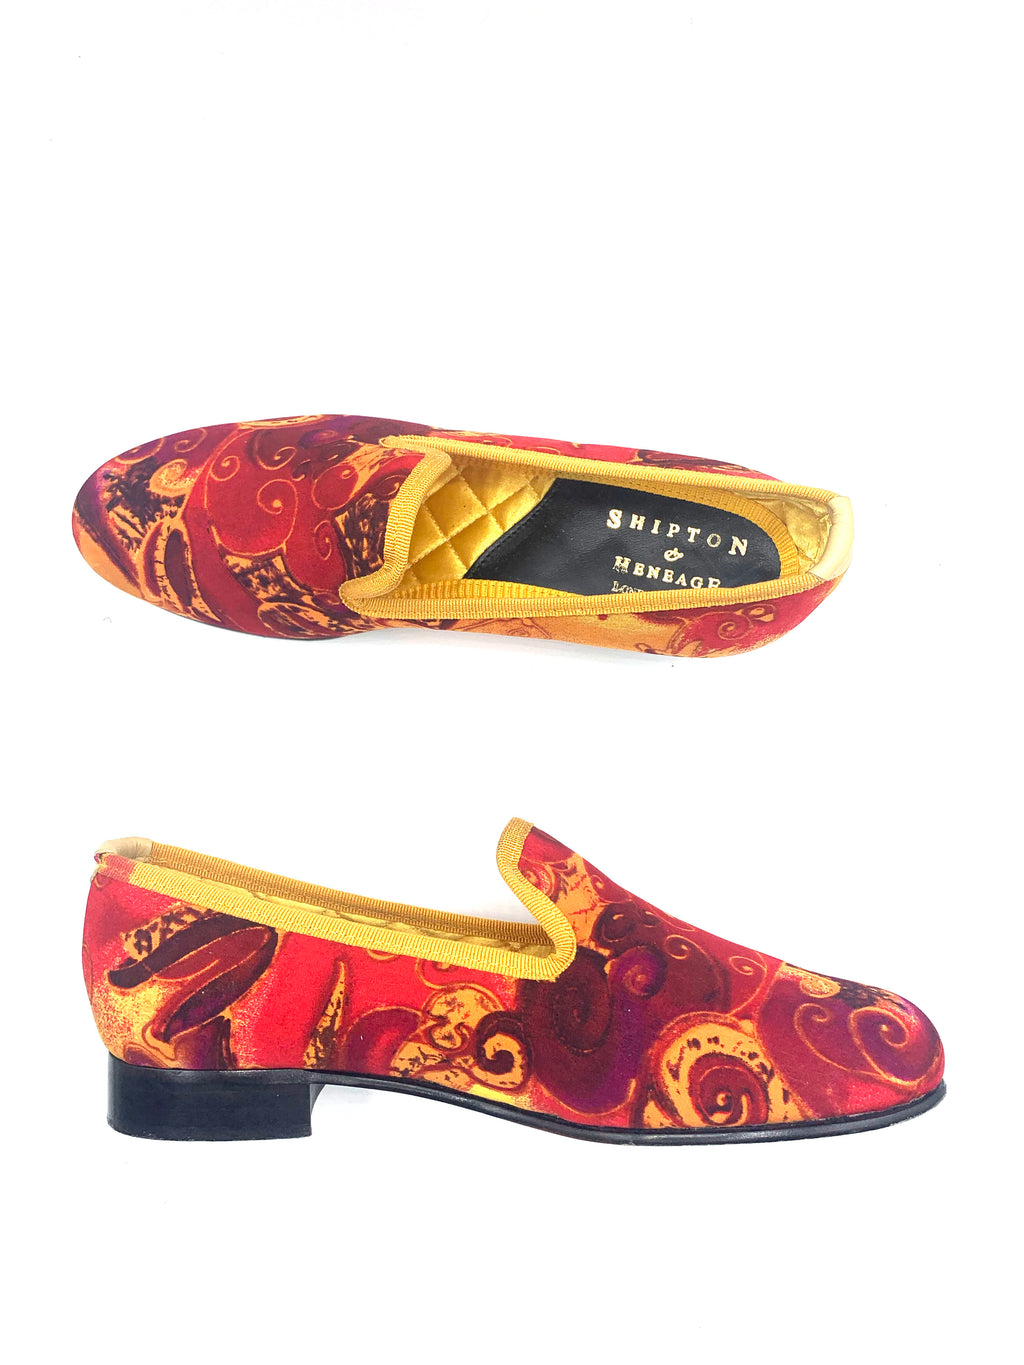 Shipton and Heneage  Bespoke Red and Gold Slippers size 6 1 of 5